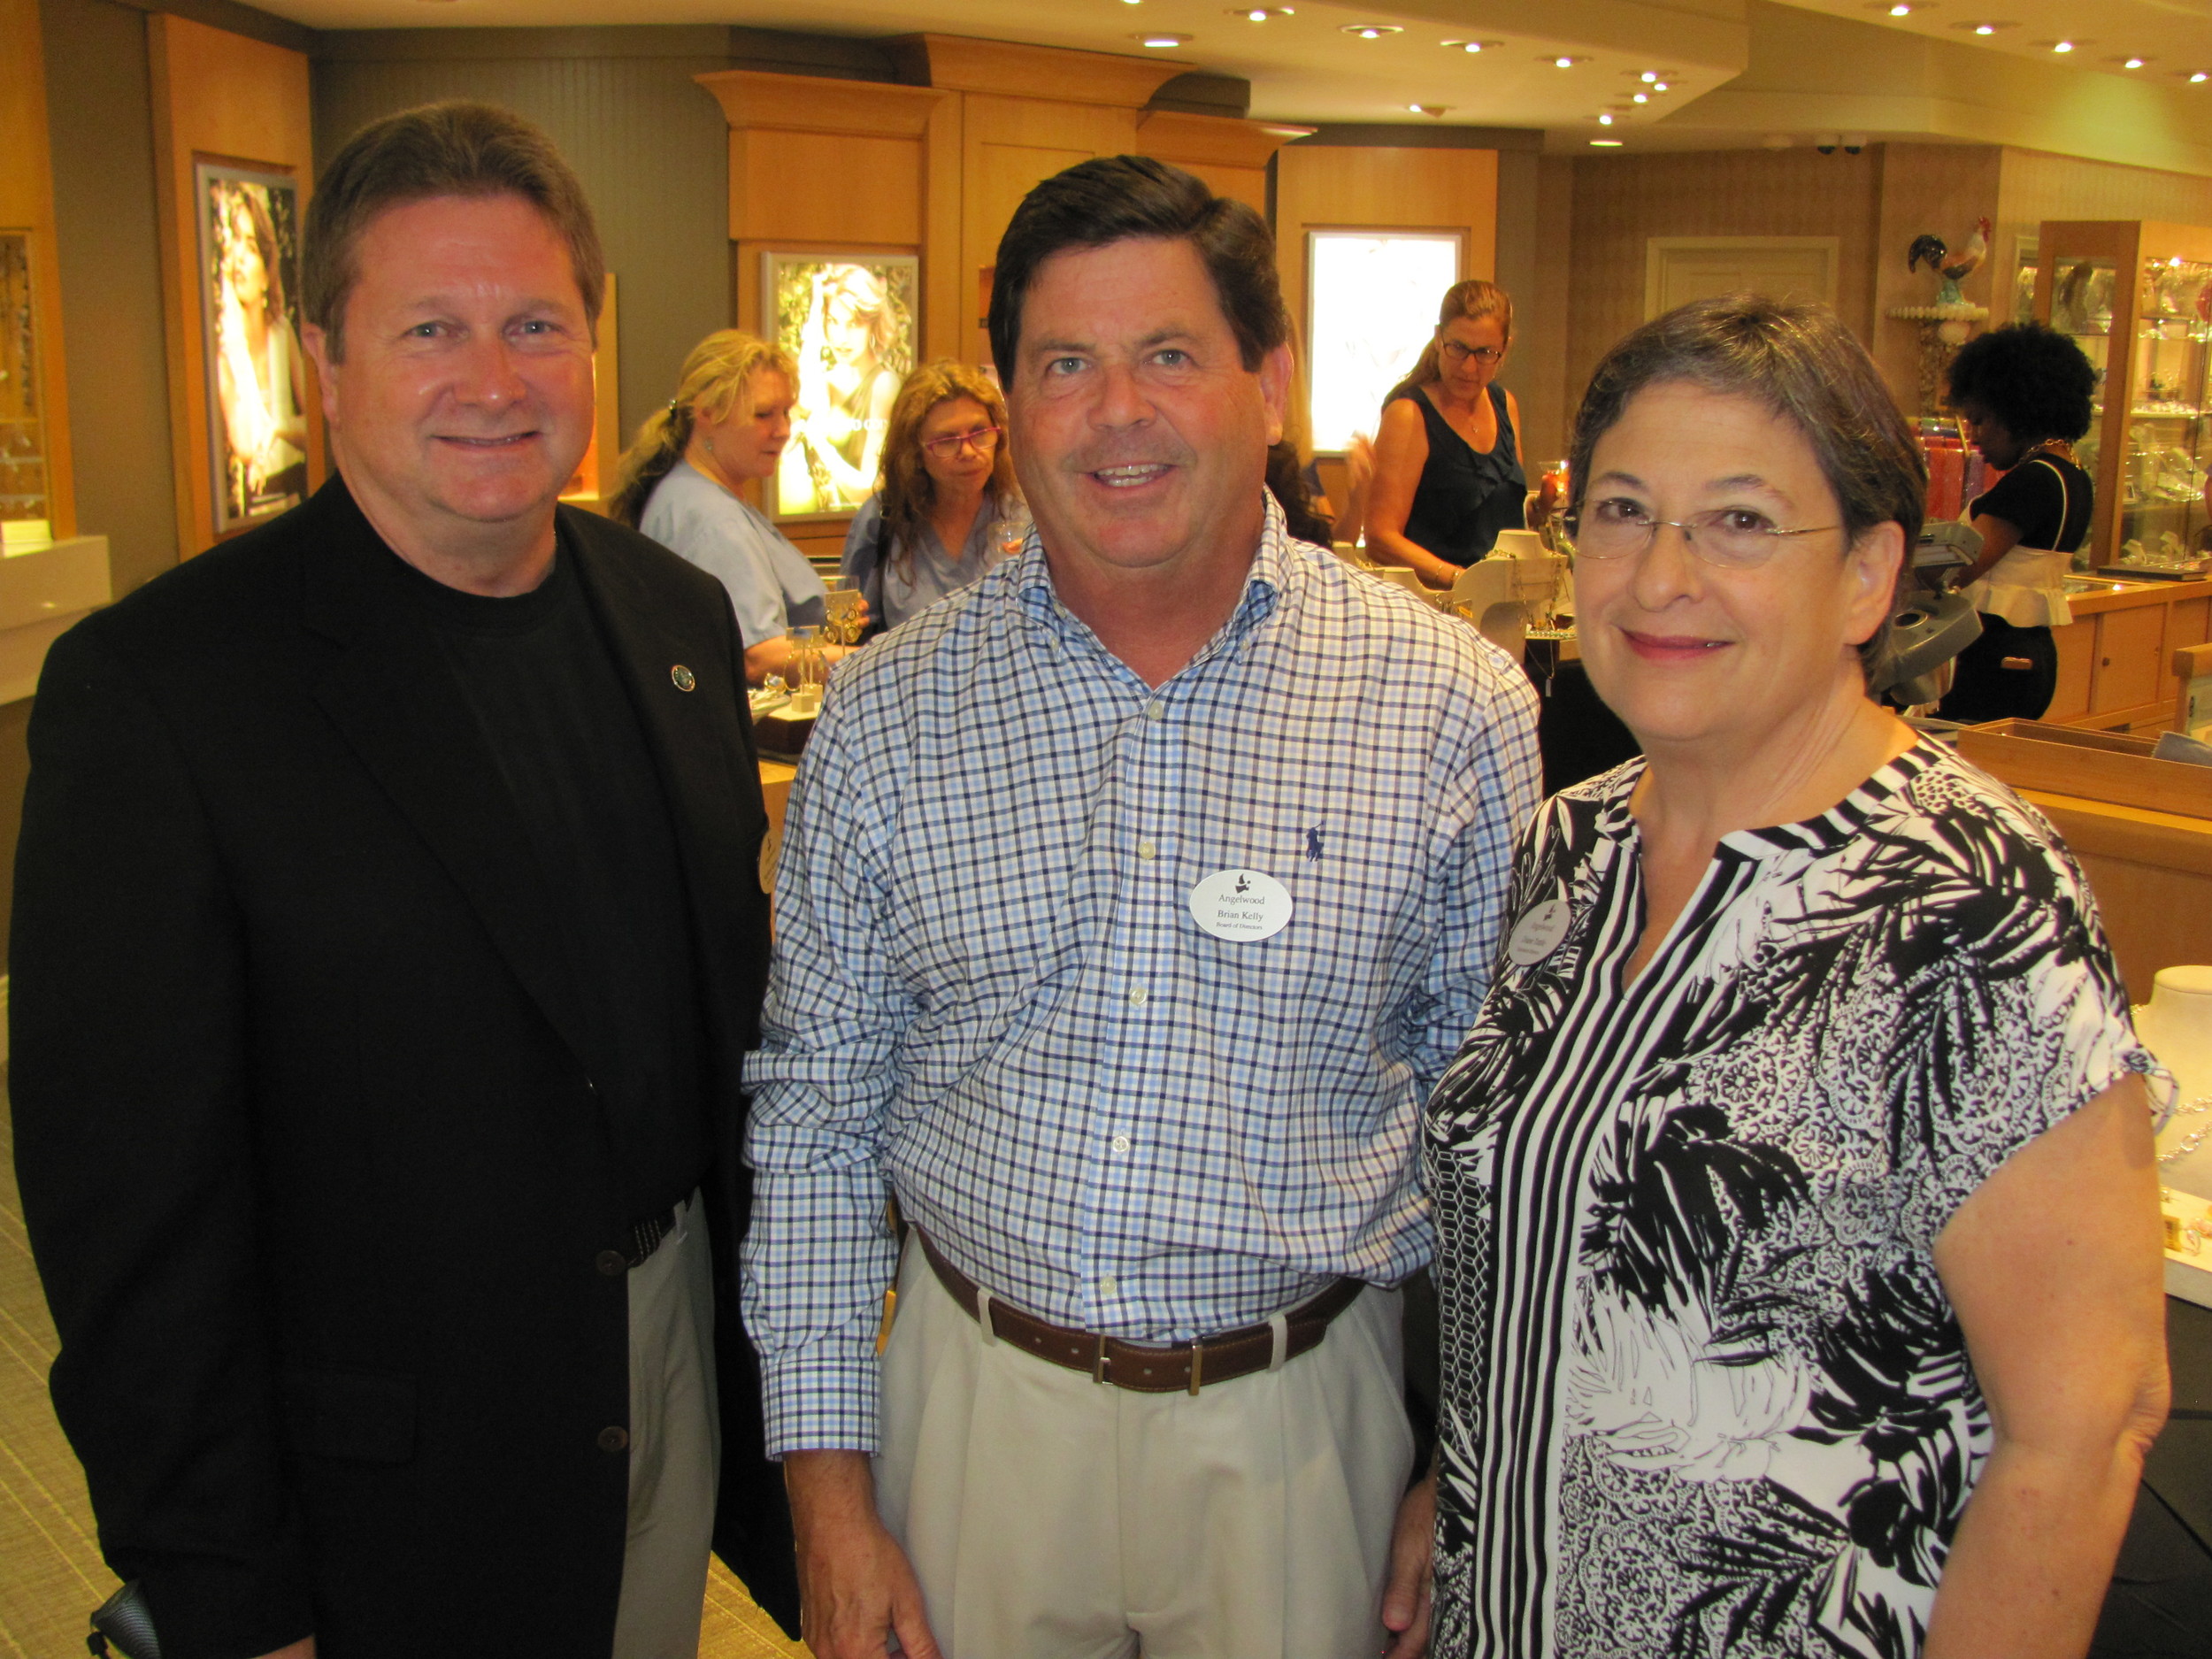 Angelwood Board Members Stephen Ramsey and Brian Kelly with the nonprofit’s Executive Director Diane Tuttle